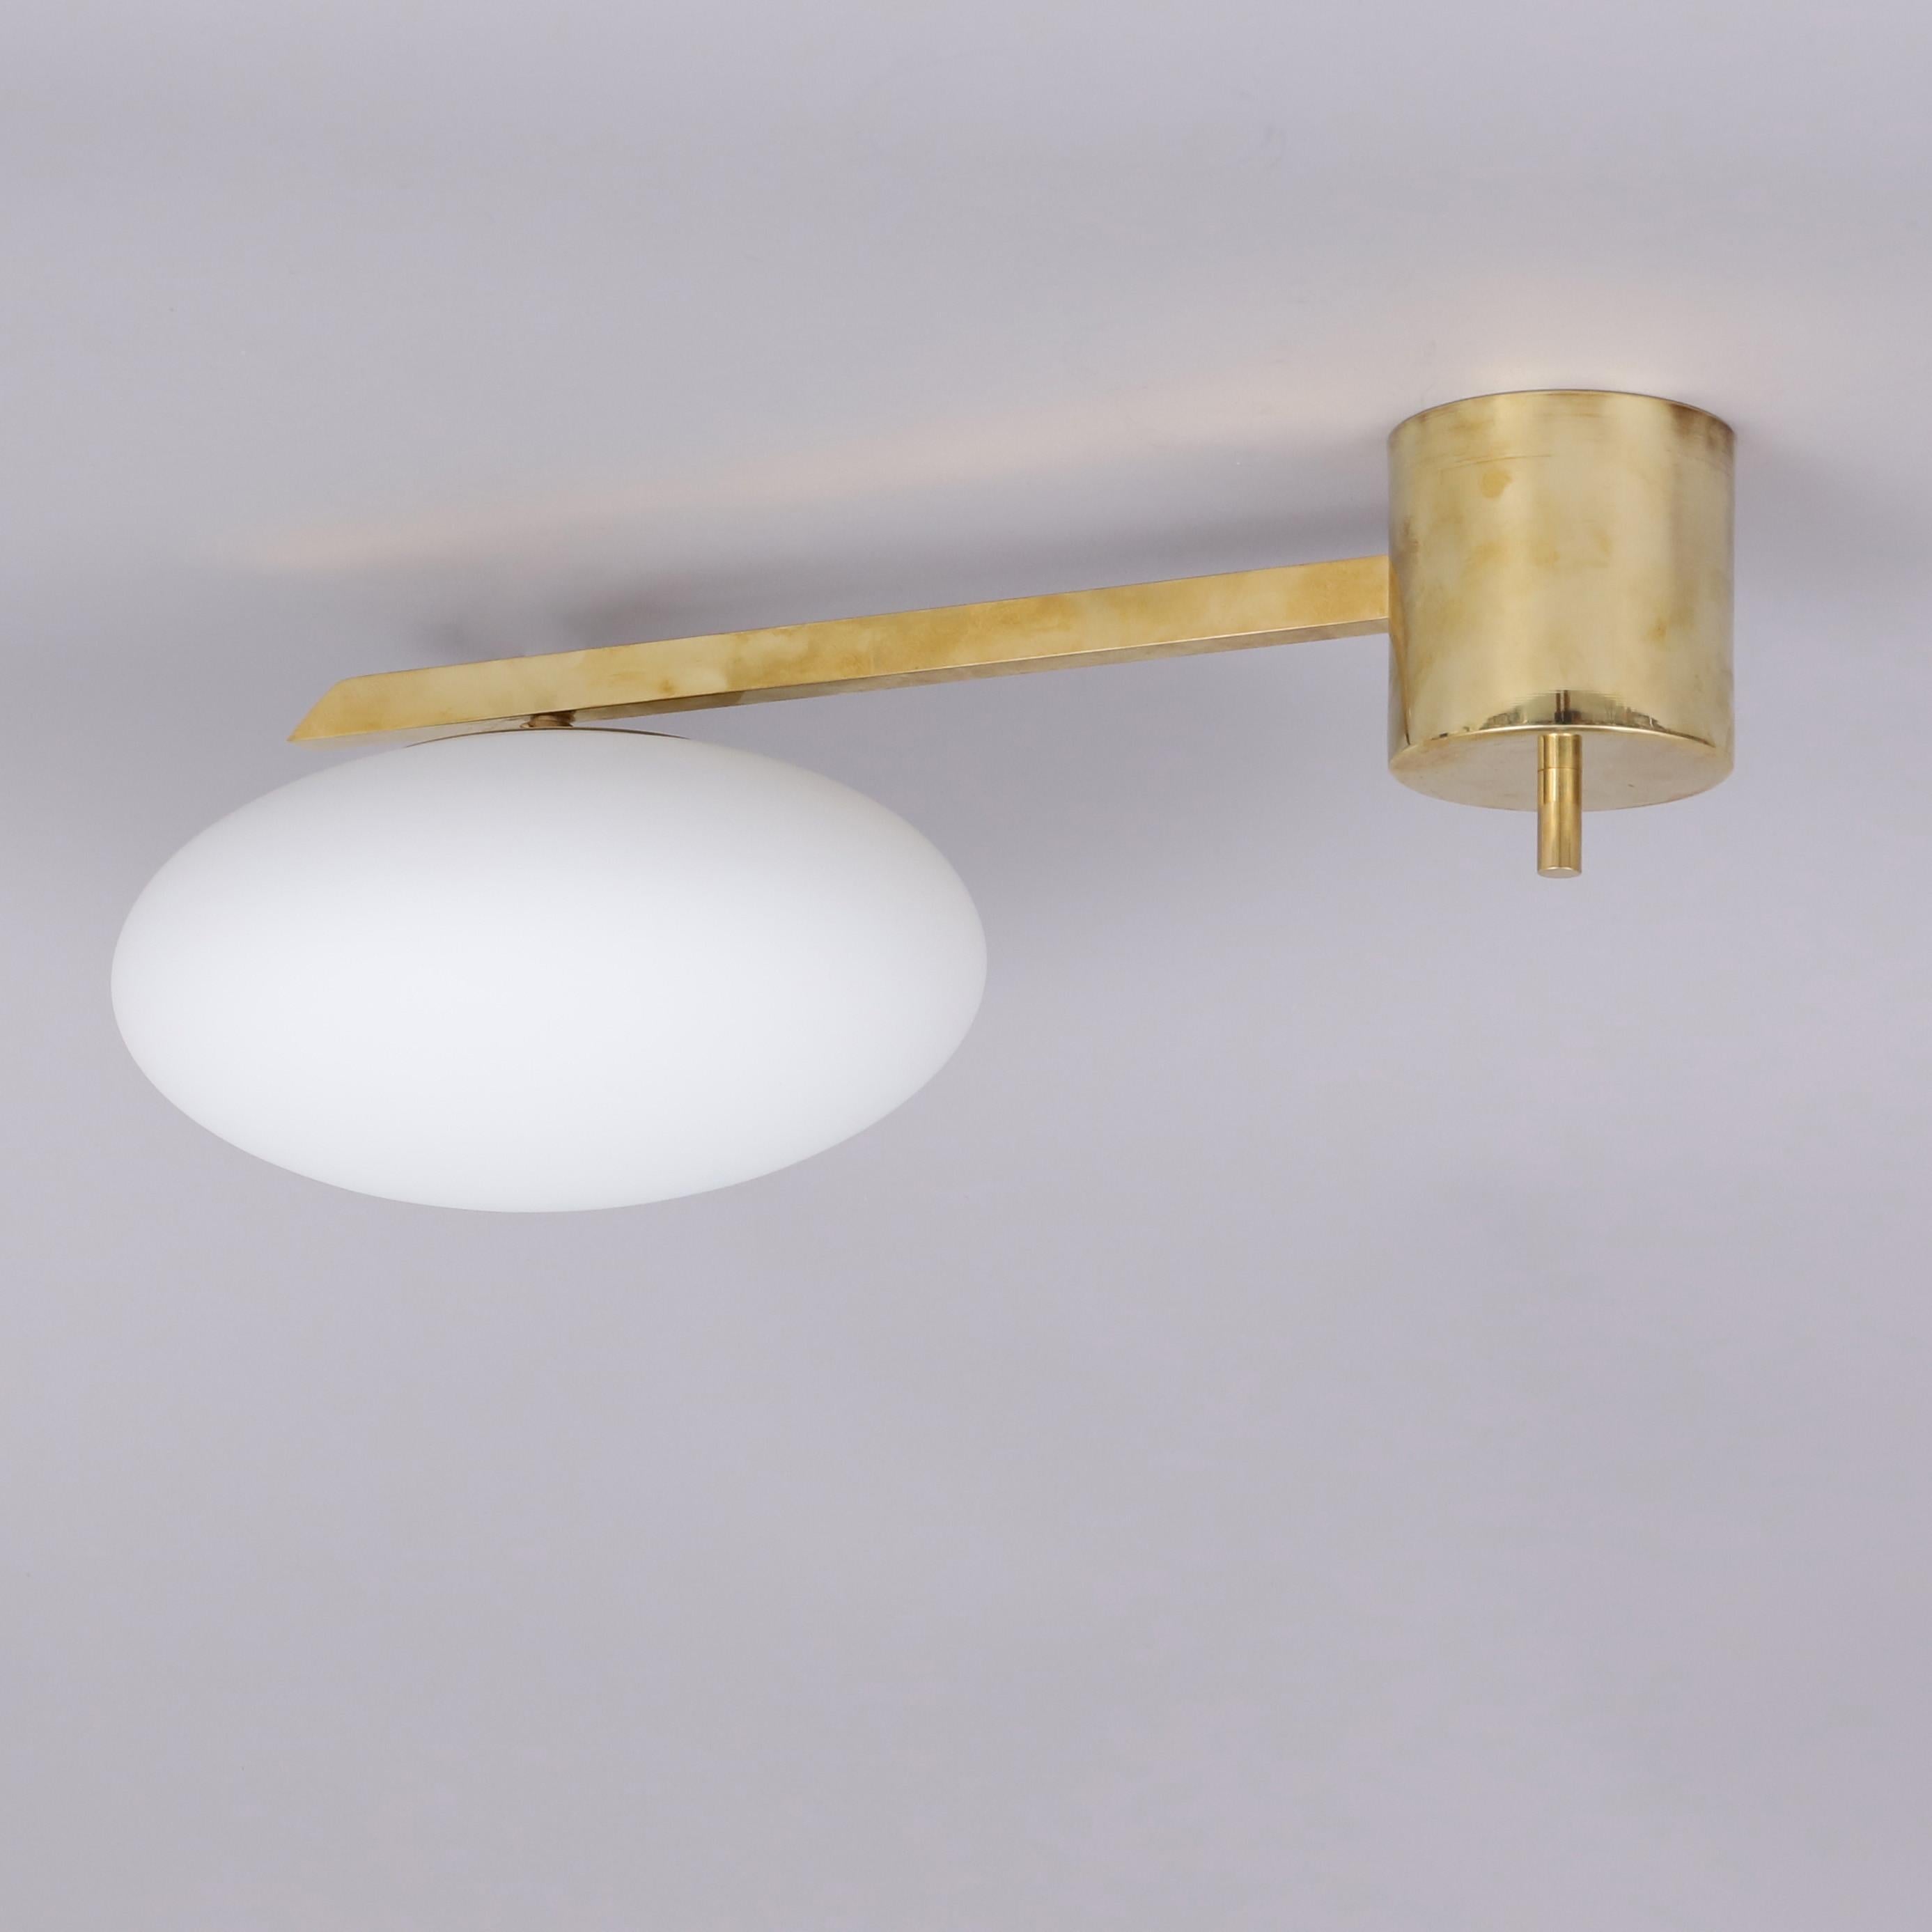 Brass Asymmetric Ceiling Light in the Style of Angelo Lelli Made in Italy 1990s/2000s For Sale